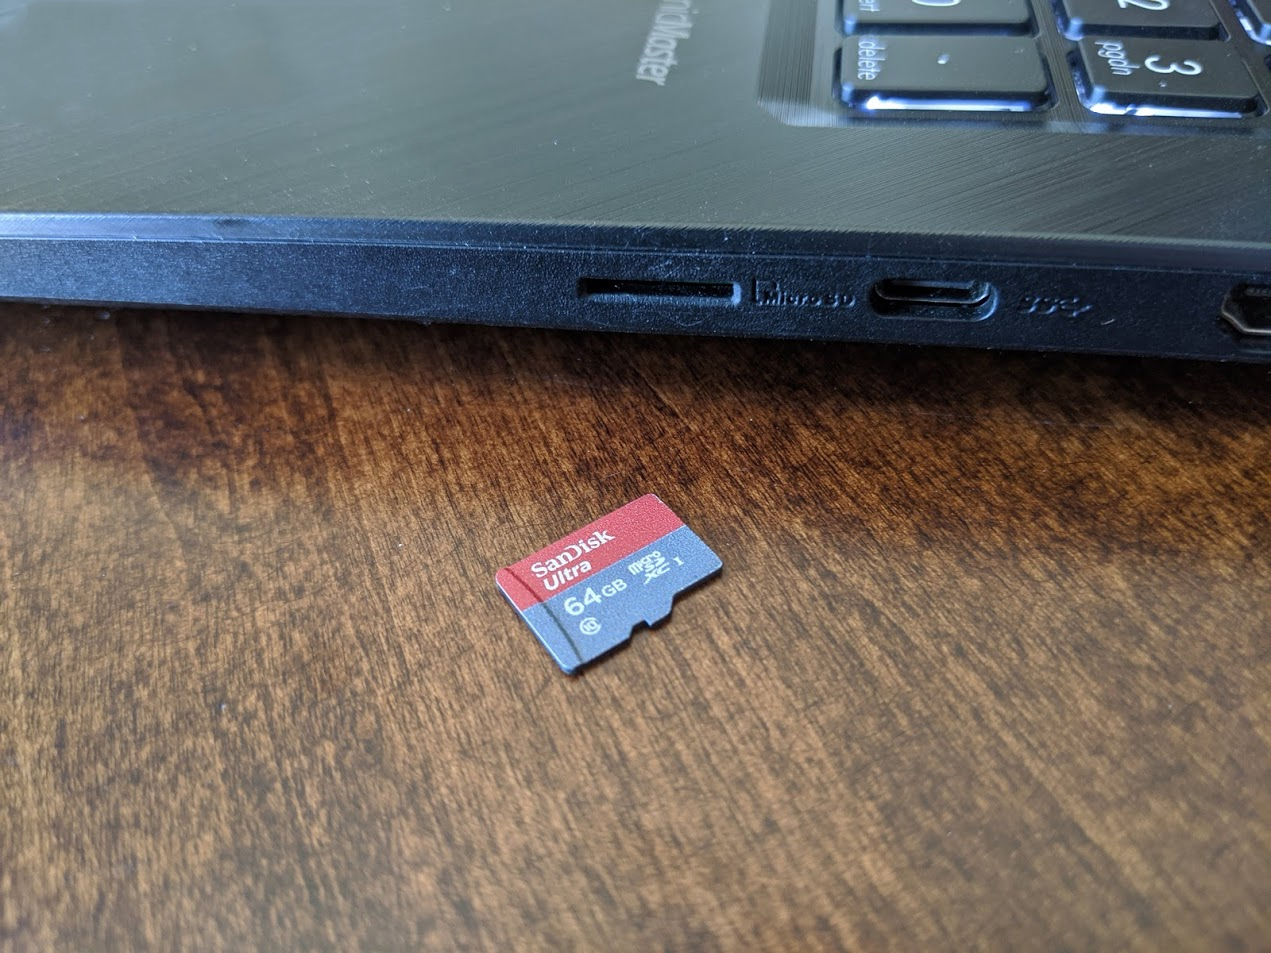 How To Transfer From One Microsd To Another